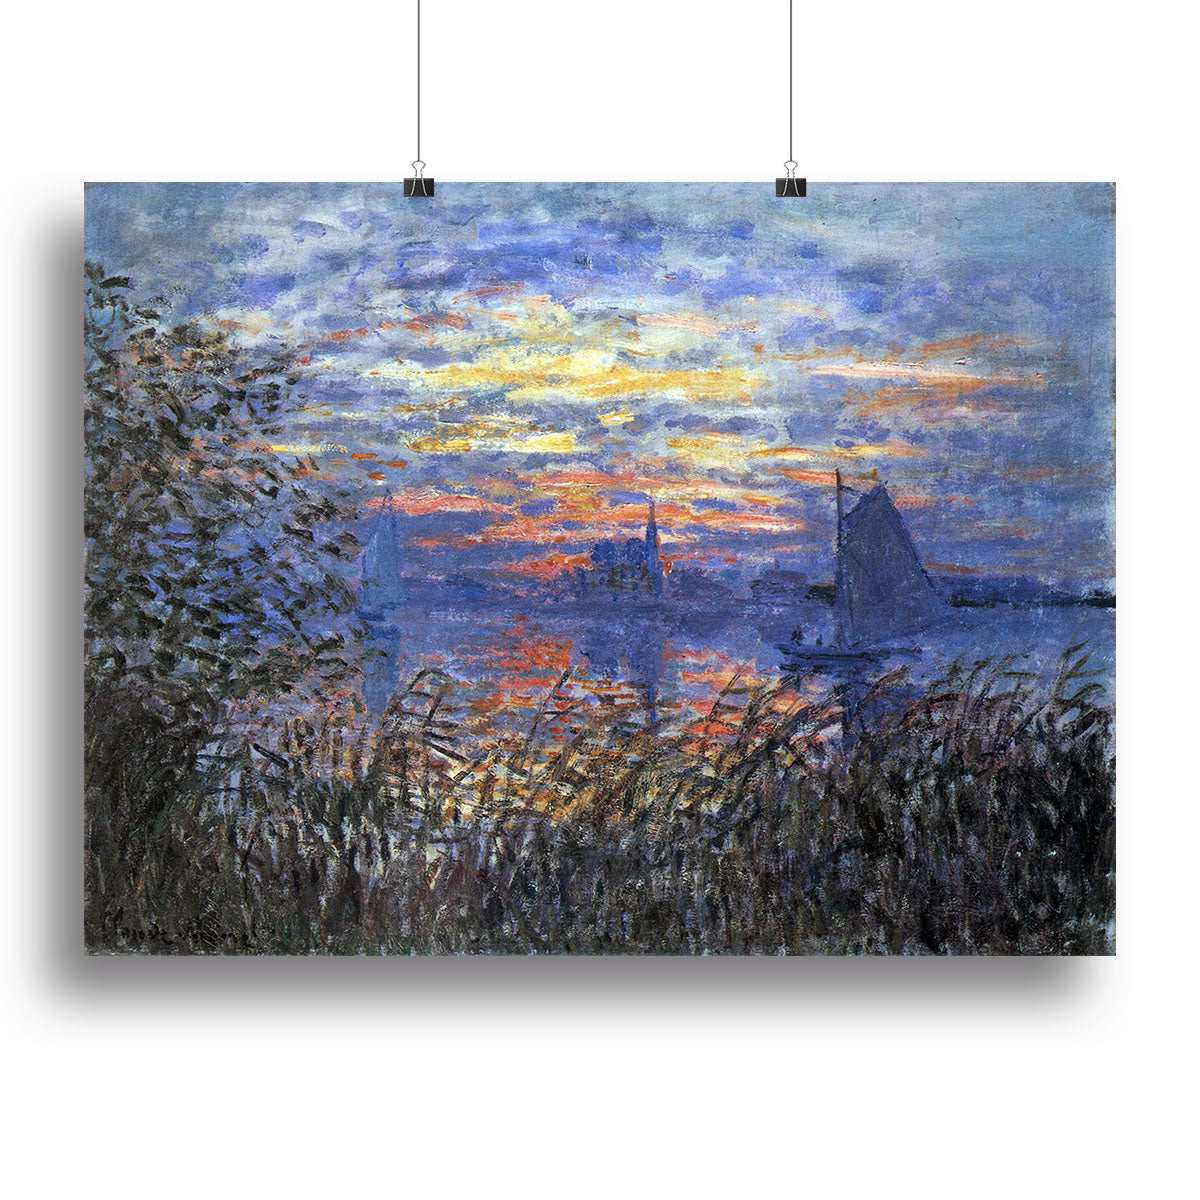 Sunset on the Seine by Monet Canvas Print or Poster - Canvas Art Rocks - 2